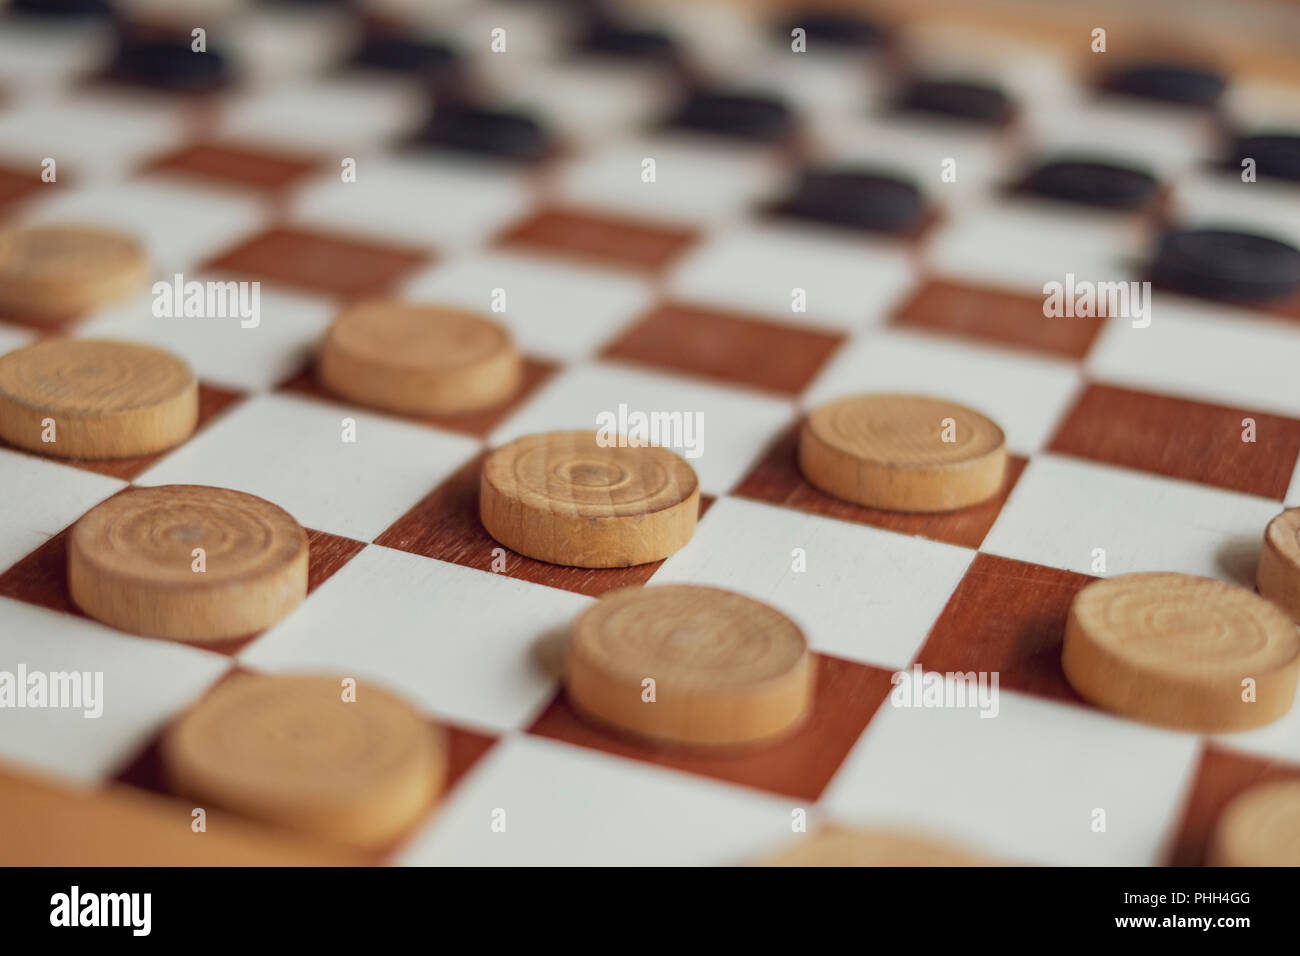 This is a wooden checkers board with black and white pawns game setup ready to play a Stock Photo